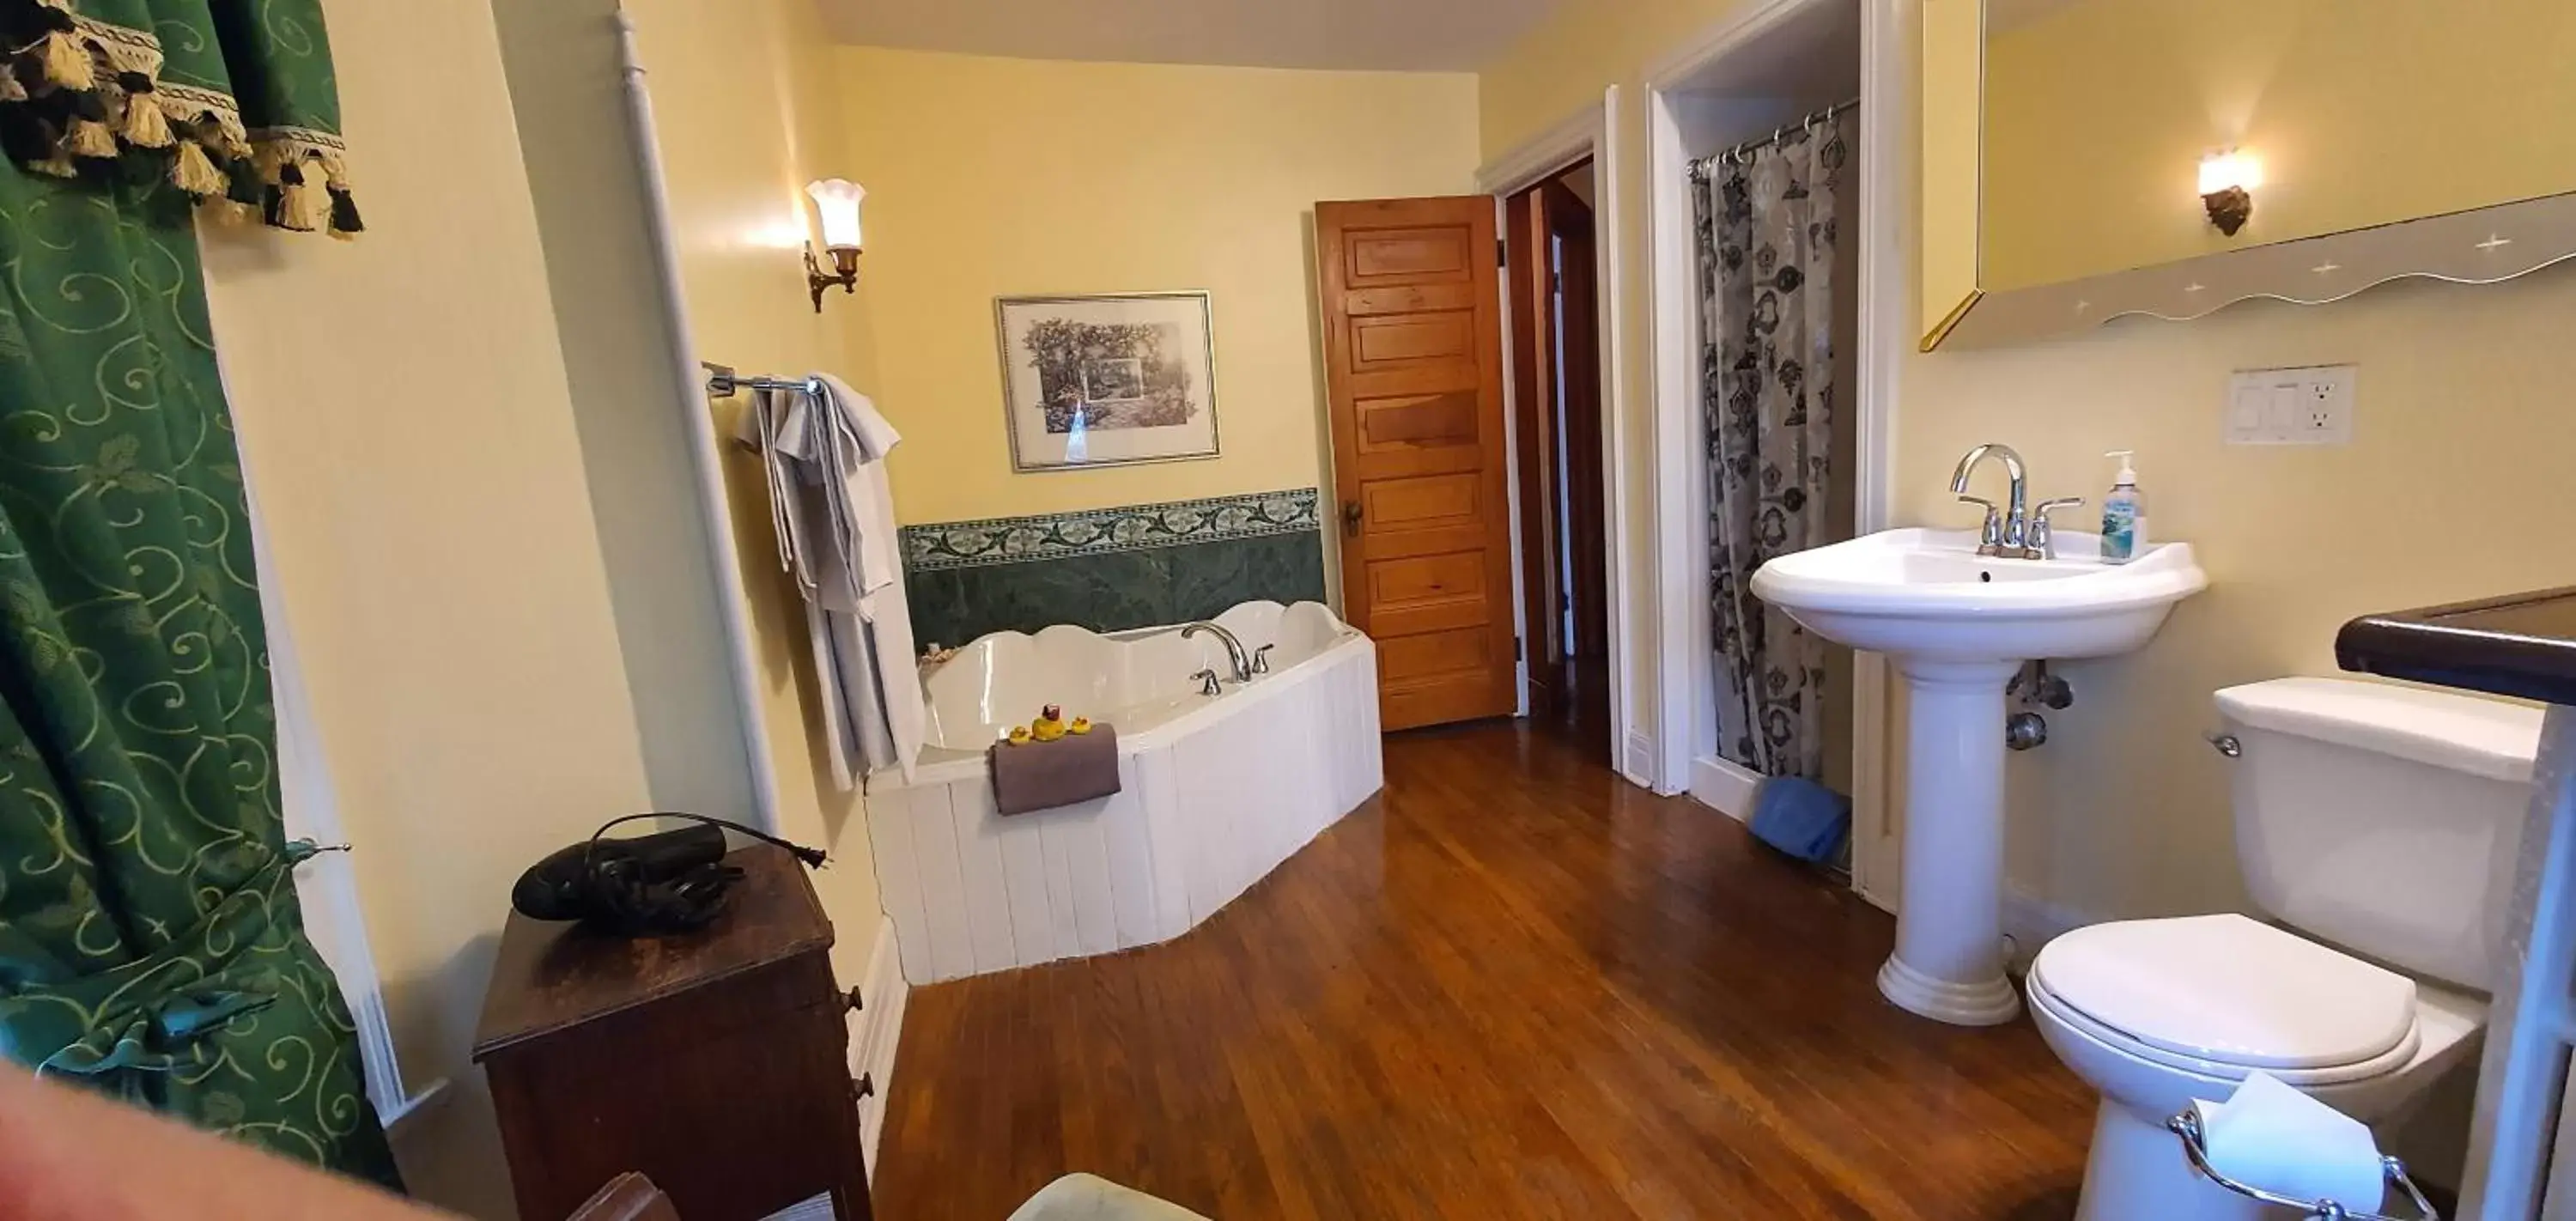 Bathroom in A Moment in Time Bed and Breakfast